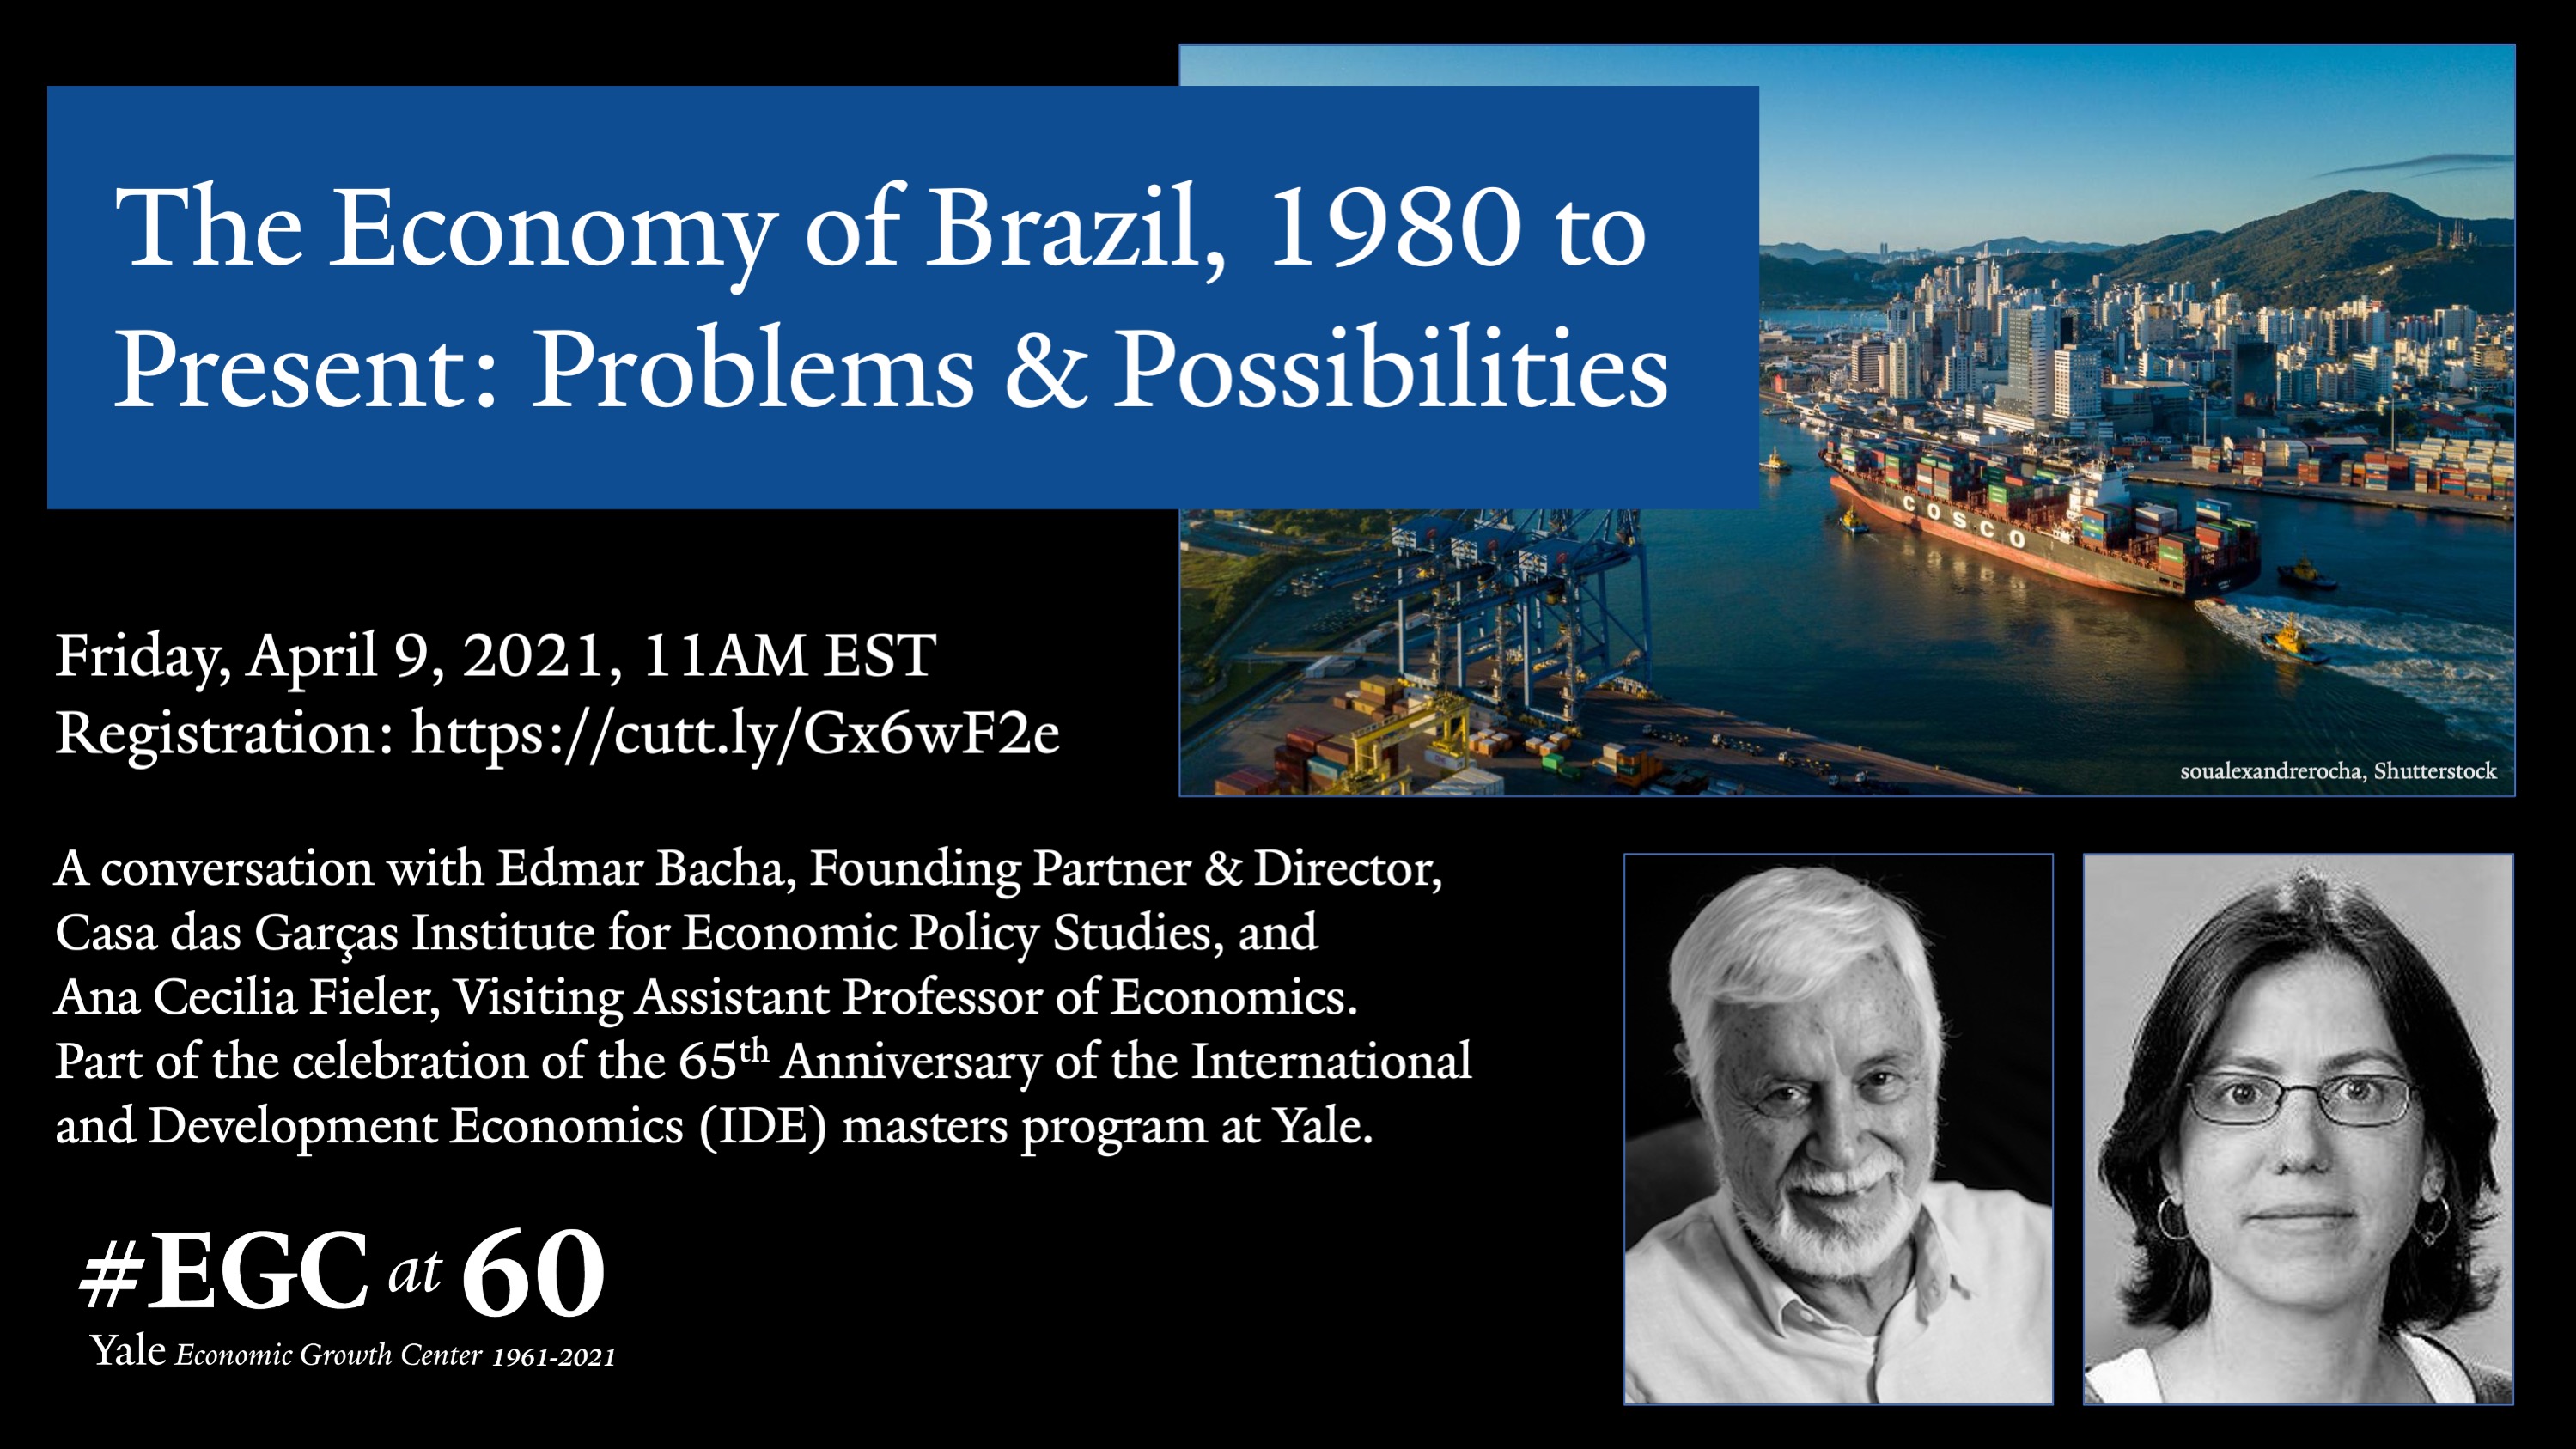 The Economy of Brazil, 1980 to Present: Problems & Possibilities lecture on Friday, April 9 at 11am EDT